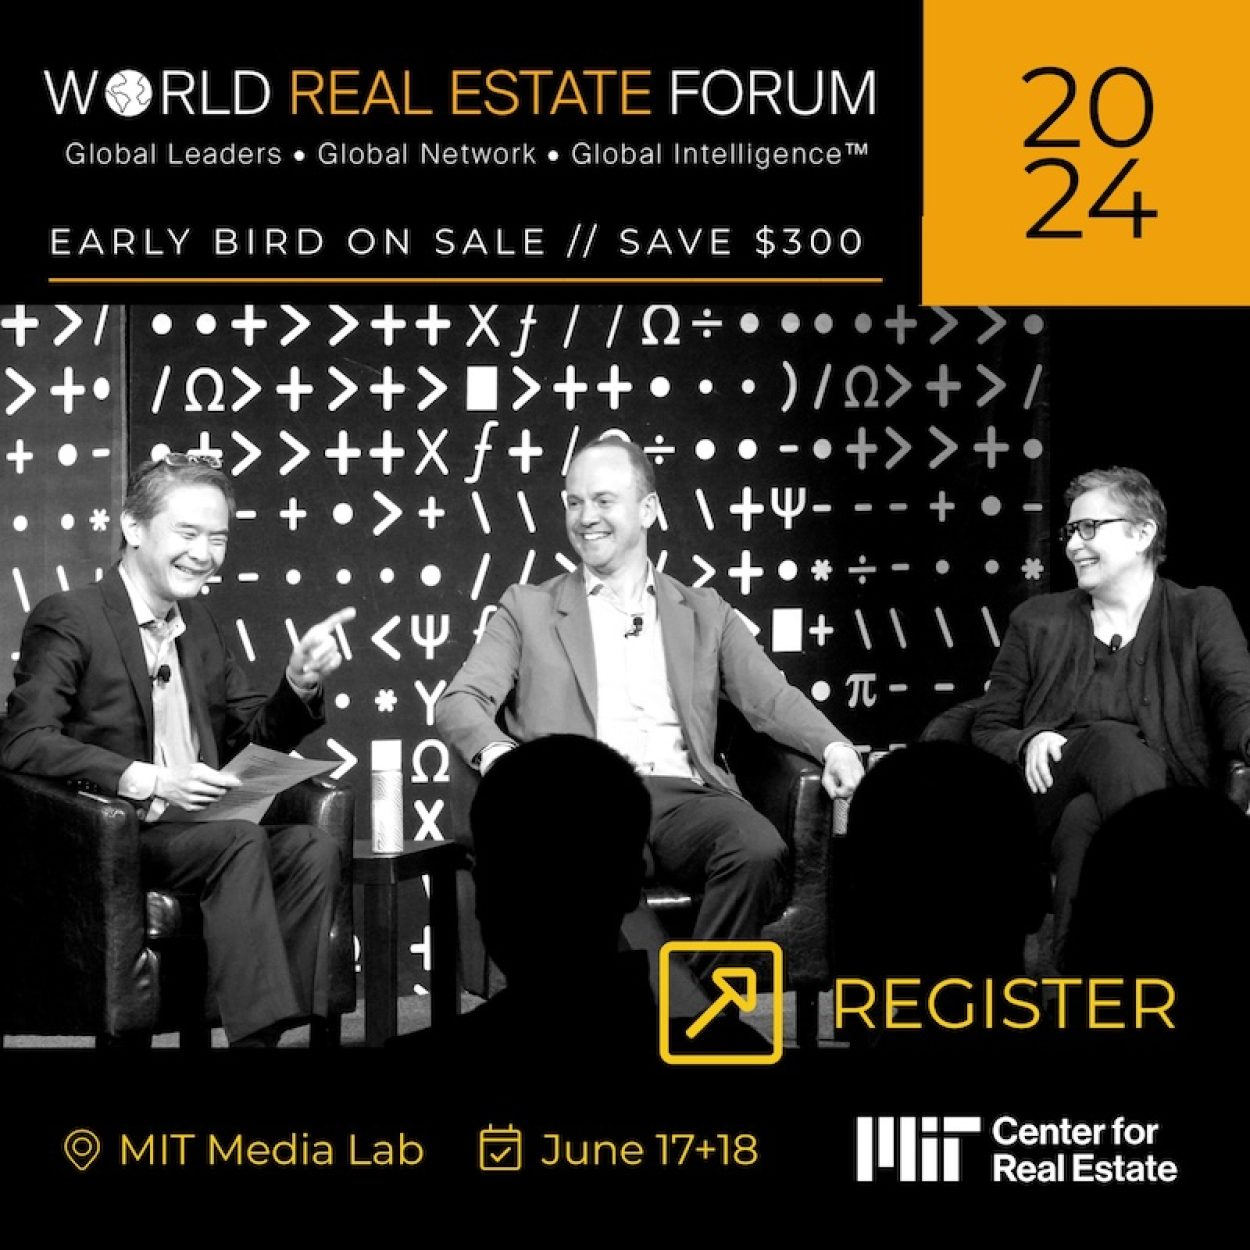 3 panelists discussing topics at world real estate forum